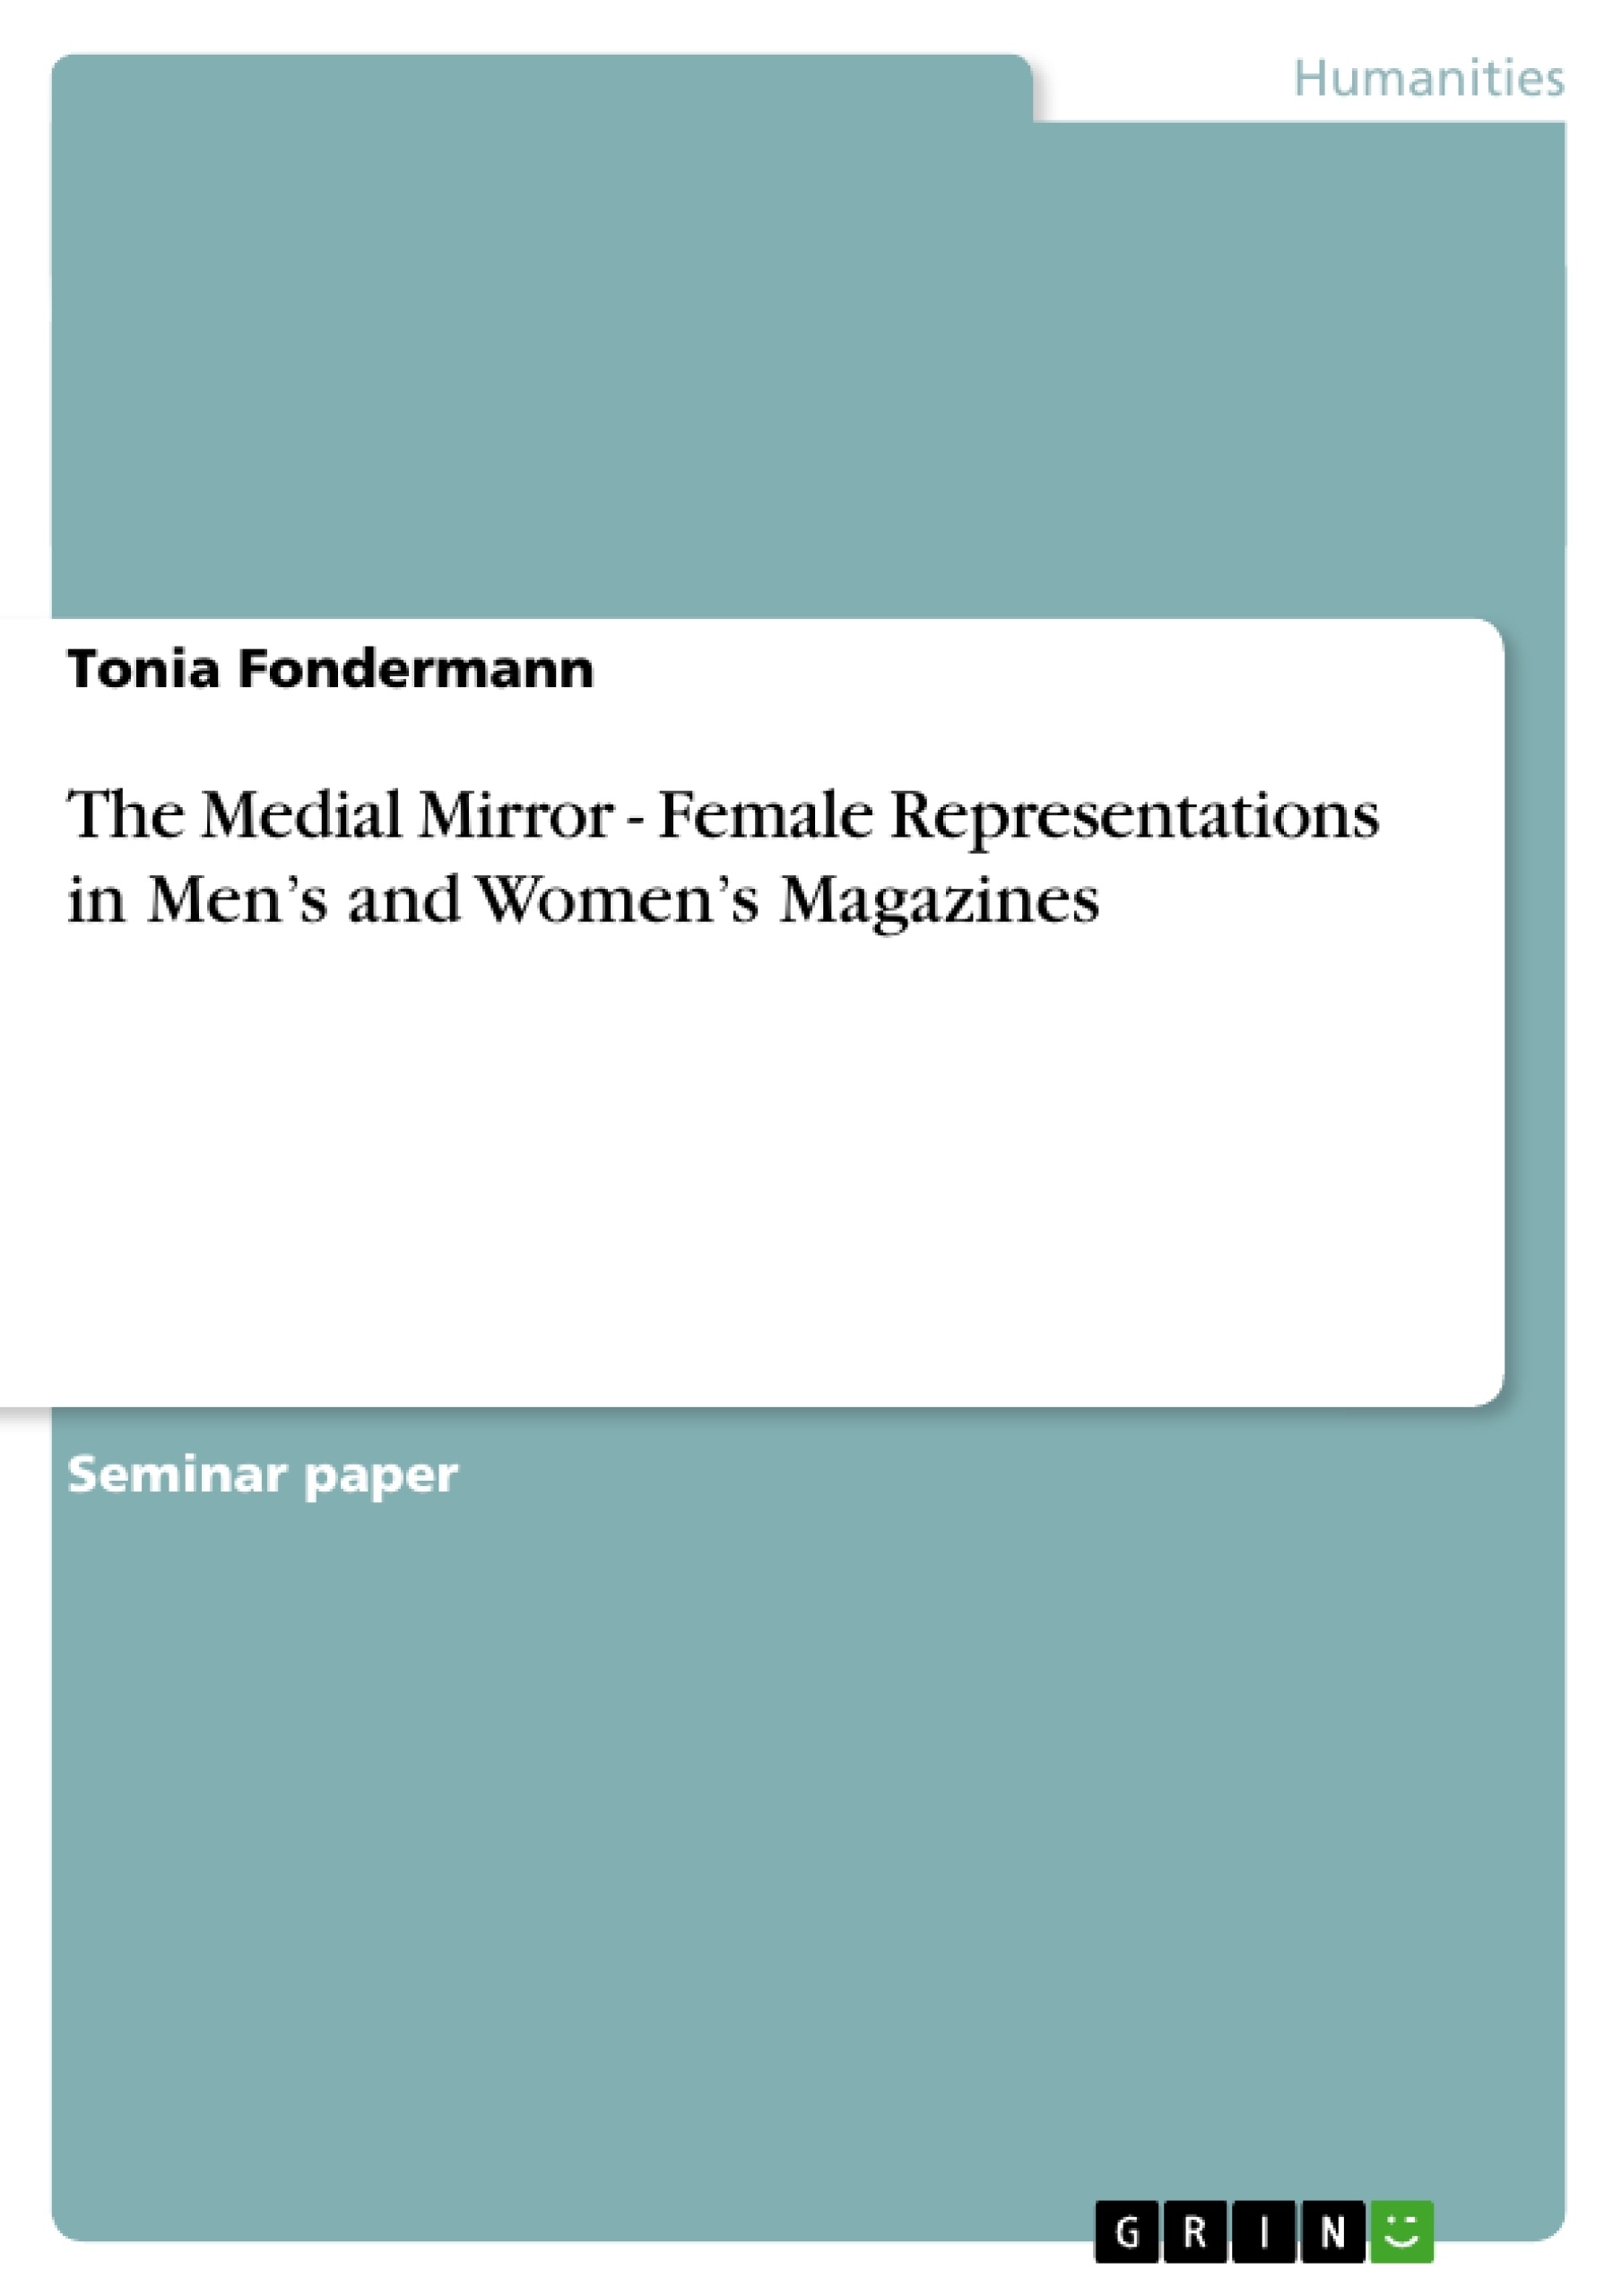 Title: The Medial Mirror - Female Representations in Men’s and Women’s Magazines